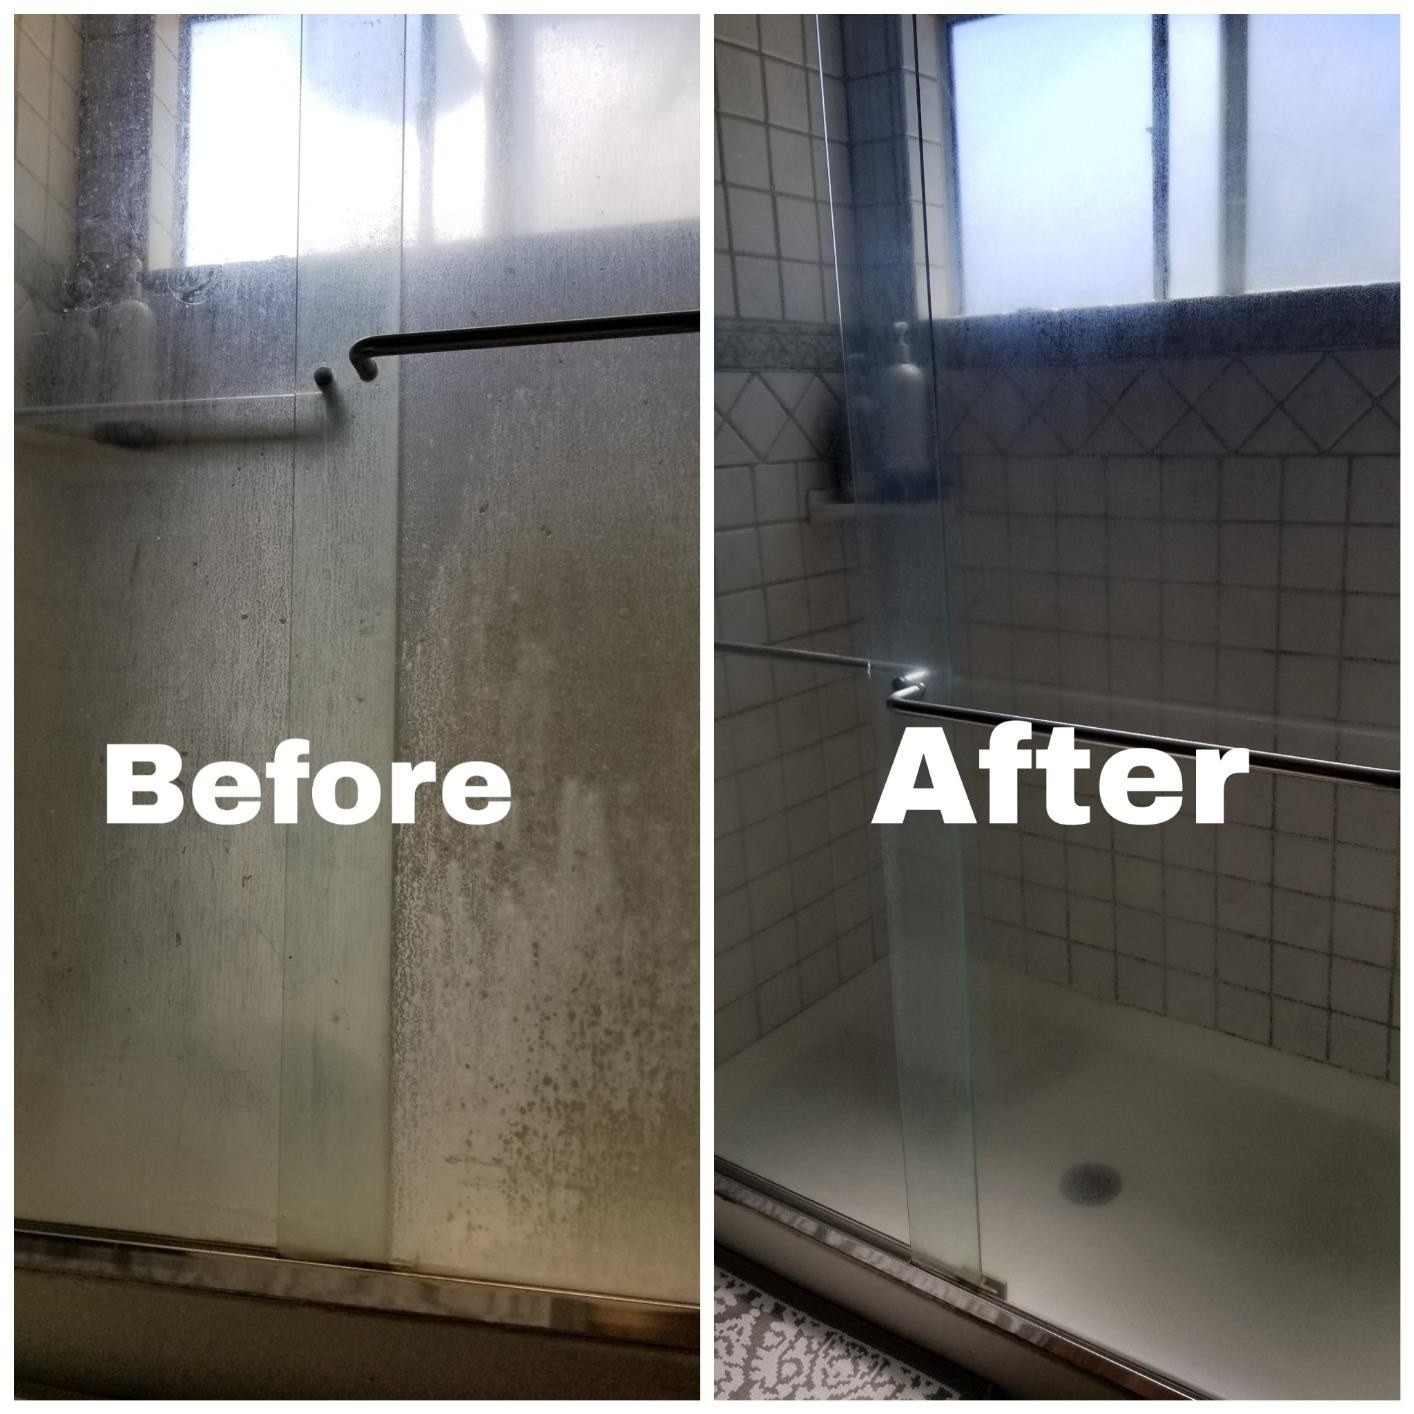 A shower door with residue streaks on the left and the same shower door looking clean and residue-free on the right